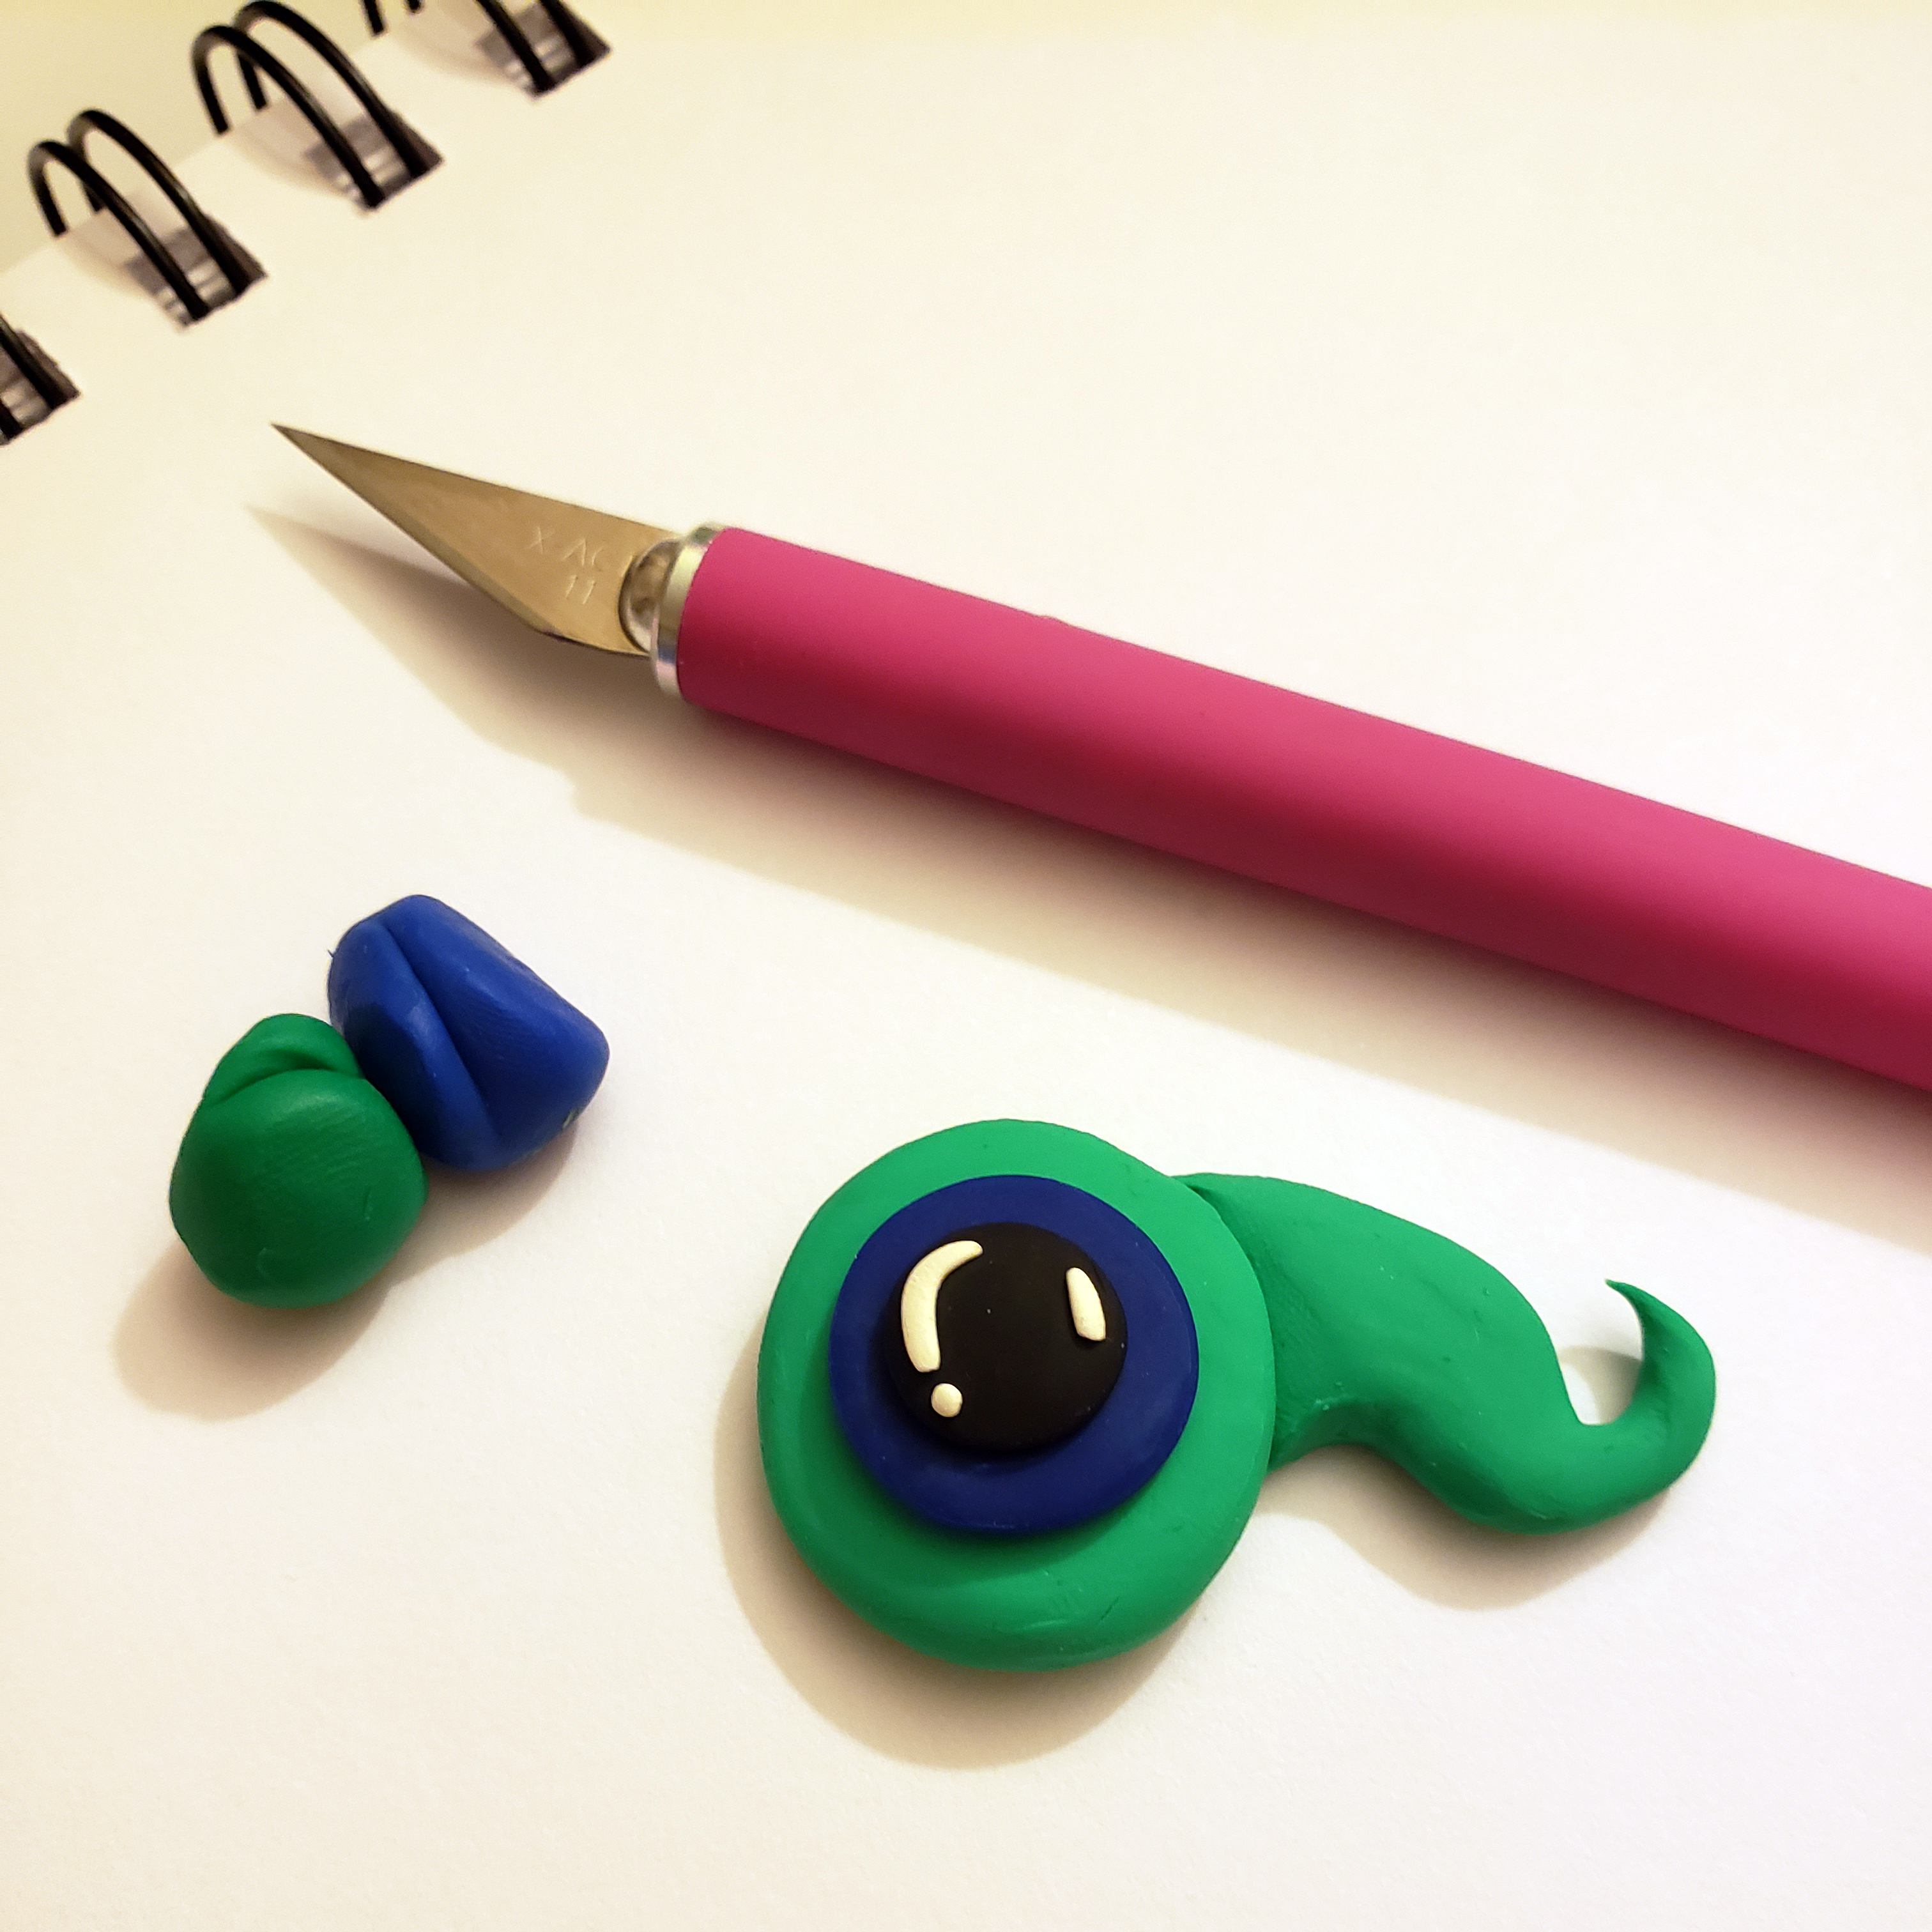 a simple polymer clay sculpt of a green and blue free-floating eyeball, the mascot of Jacksepticeye